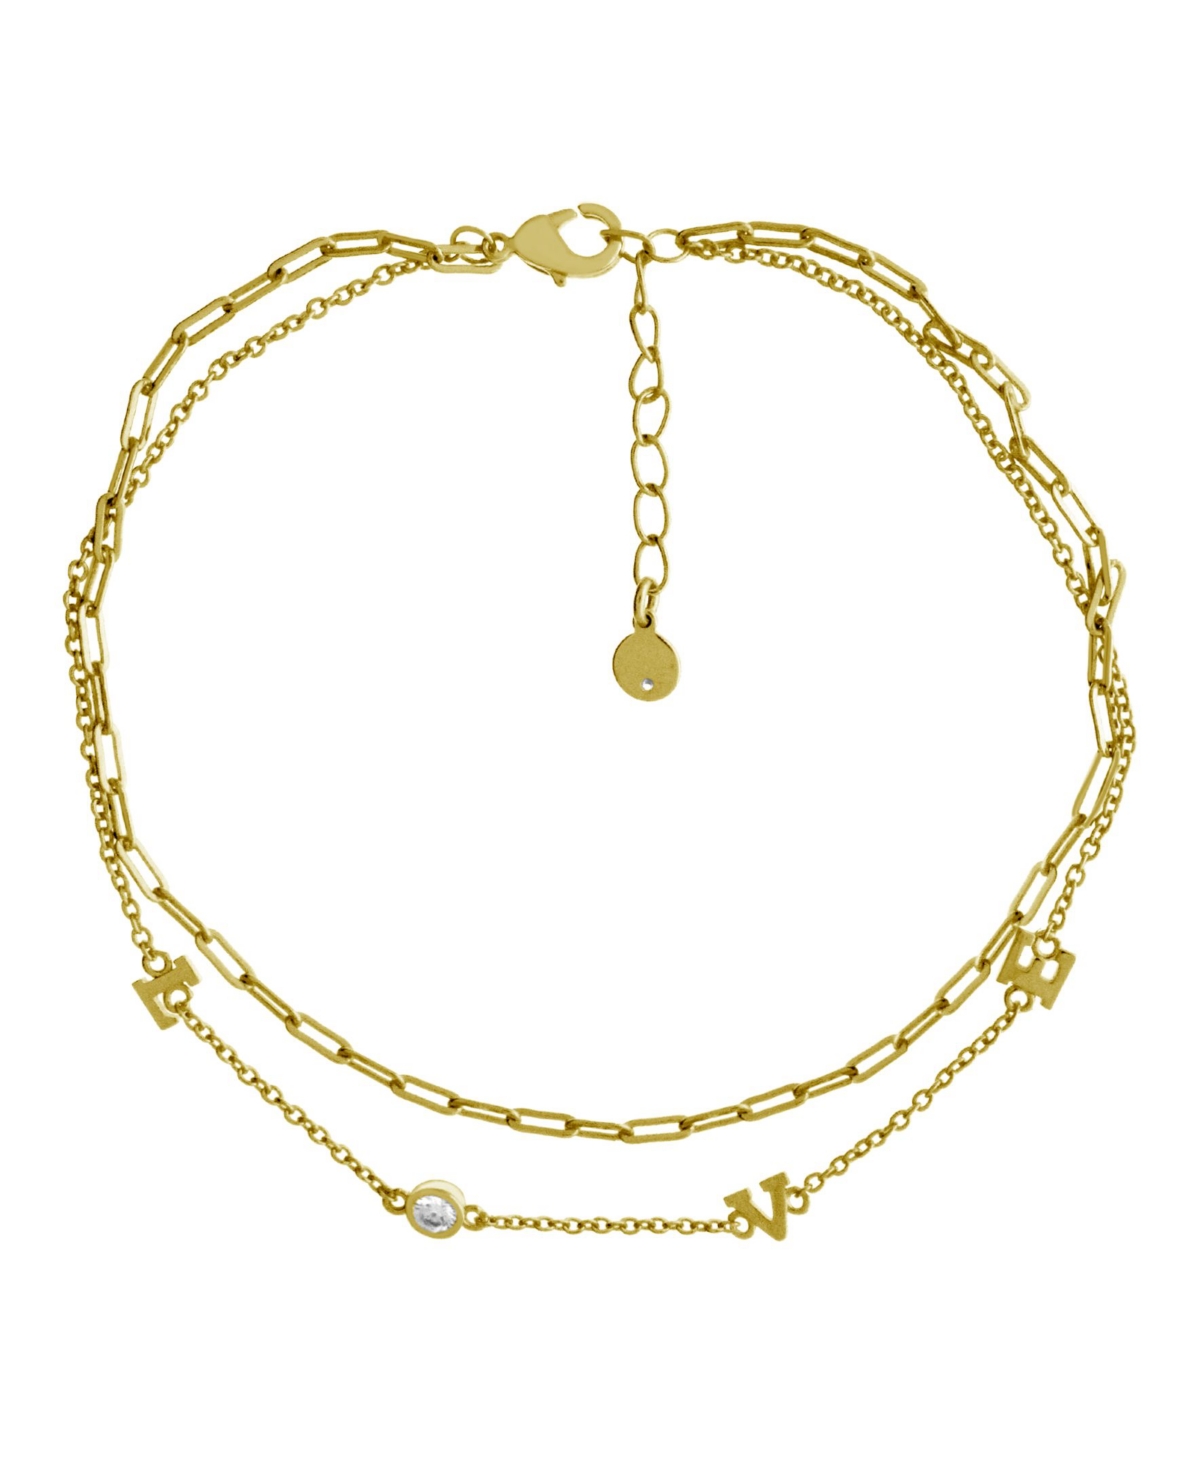 Love Double Chain Anklet in Gold Plate - Gold